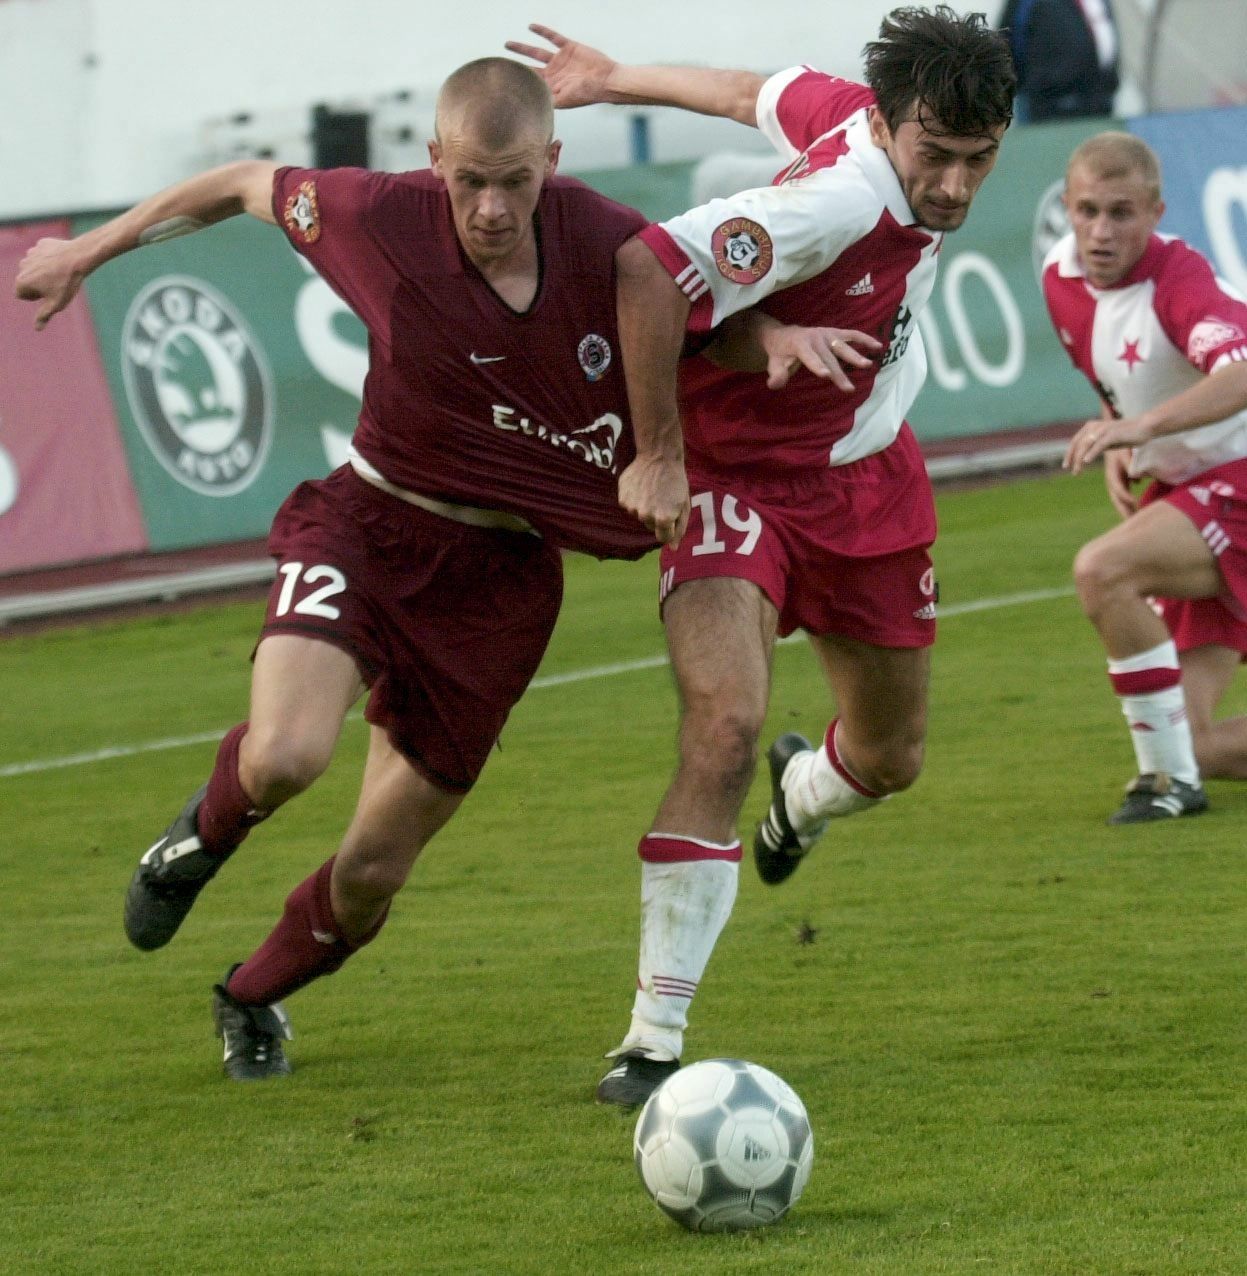 Former defender Slavia Sankovic has died aged 42.  The police found him dead